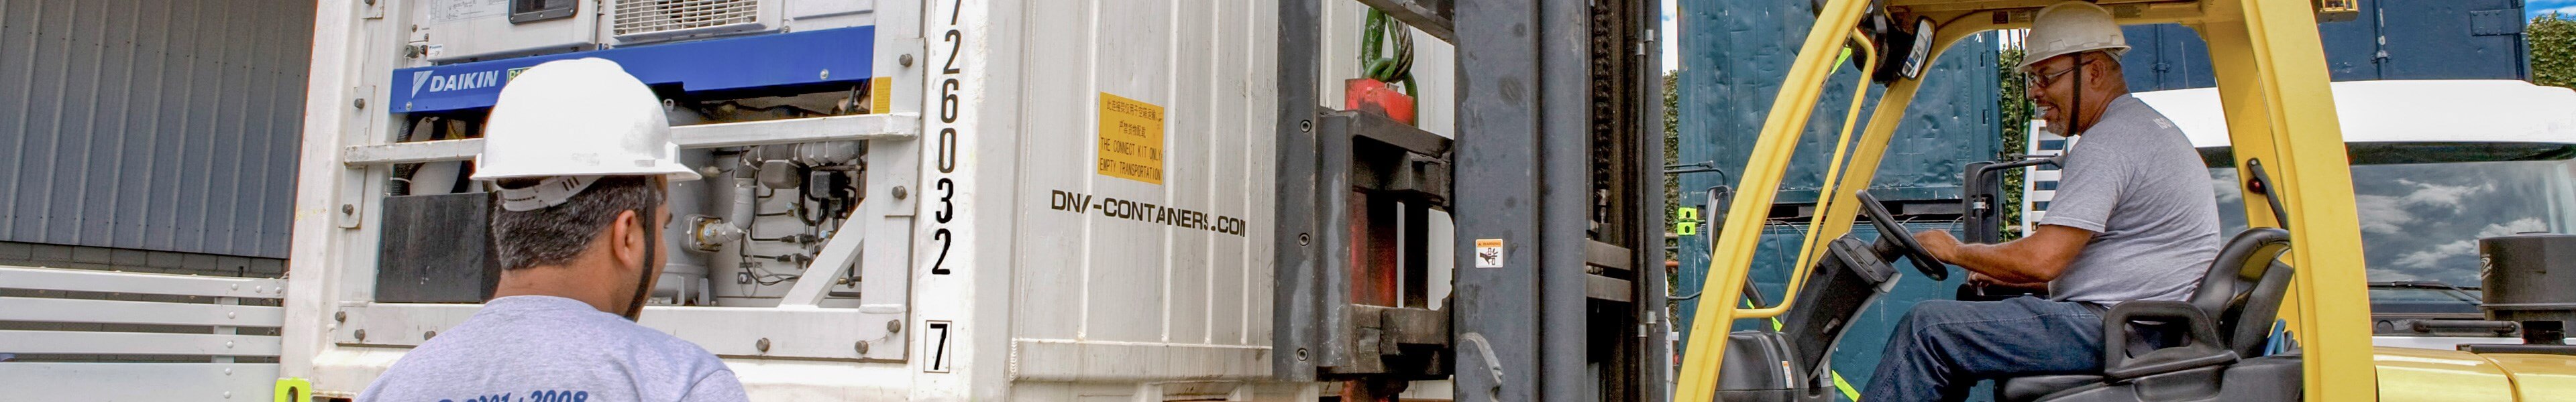 DNV OFFSHORE CCU Containers - TITAN Containers